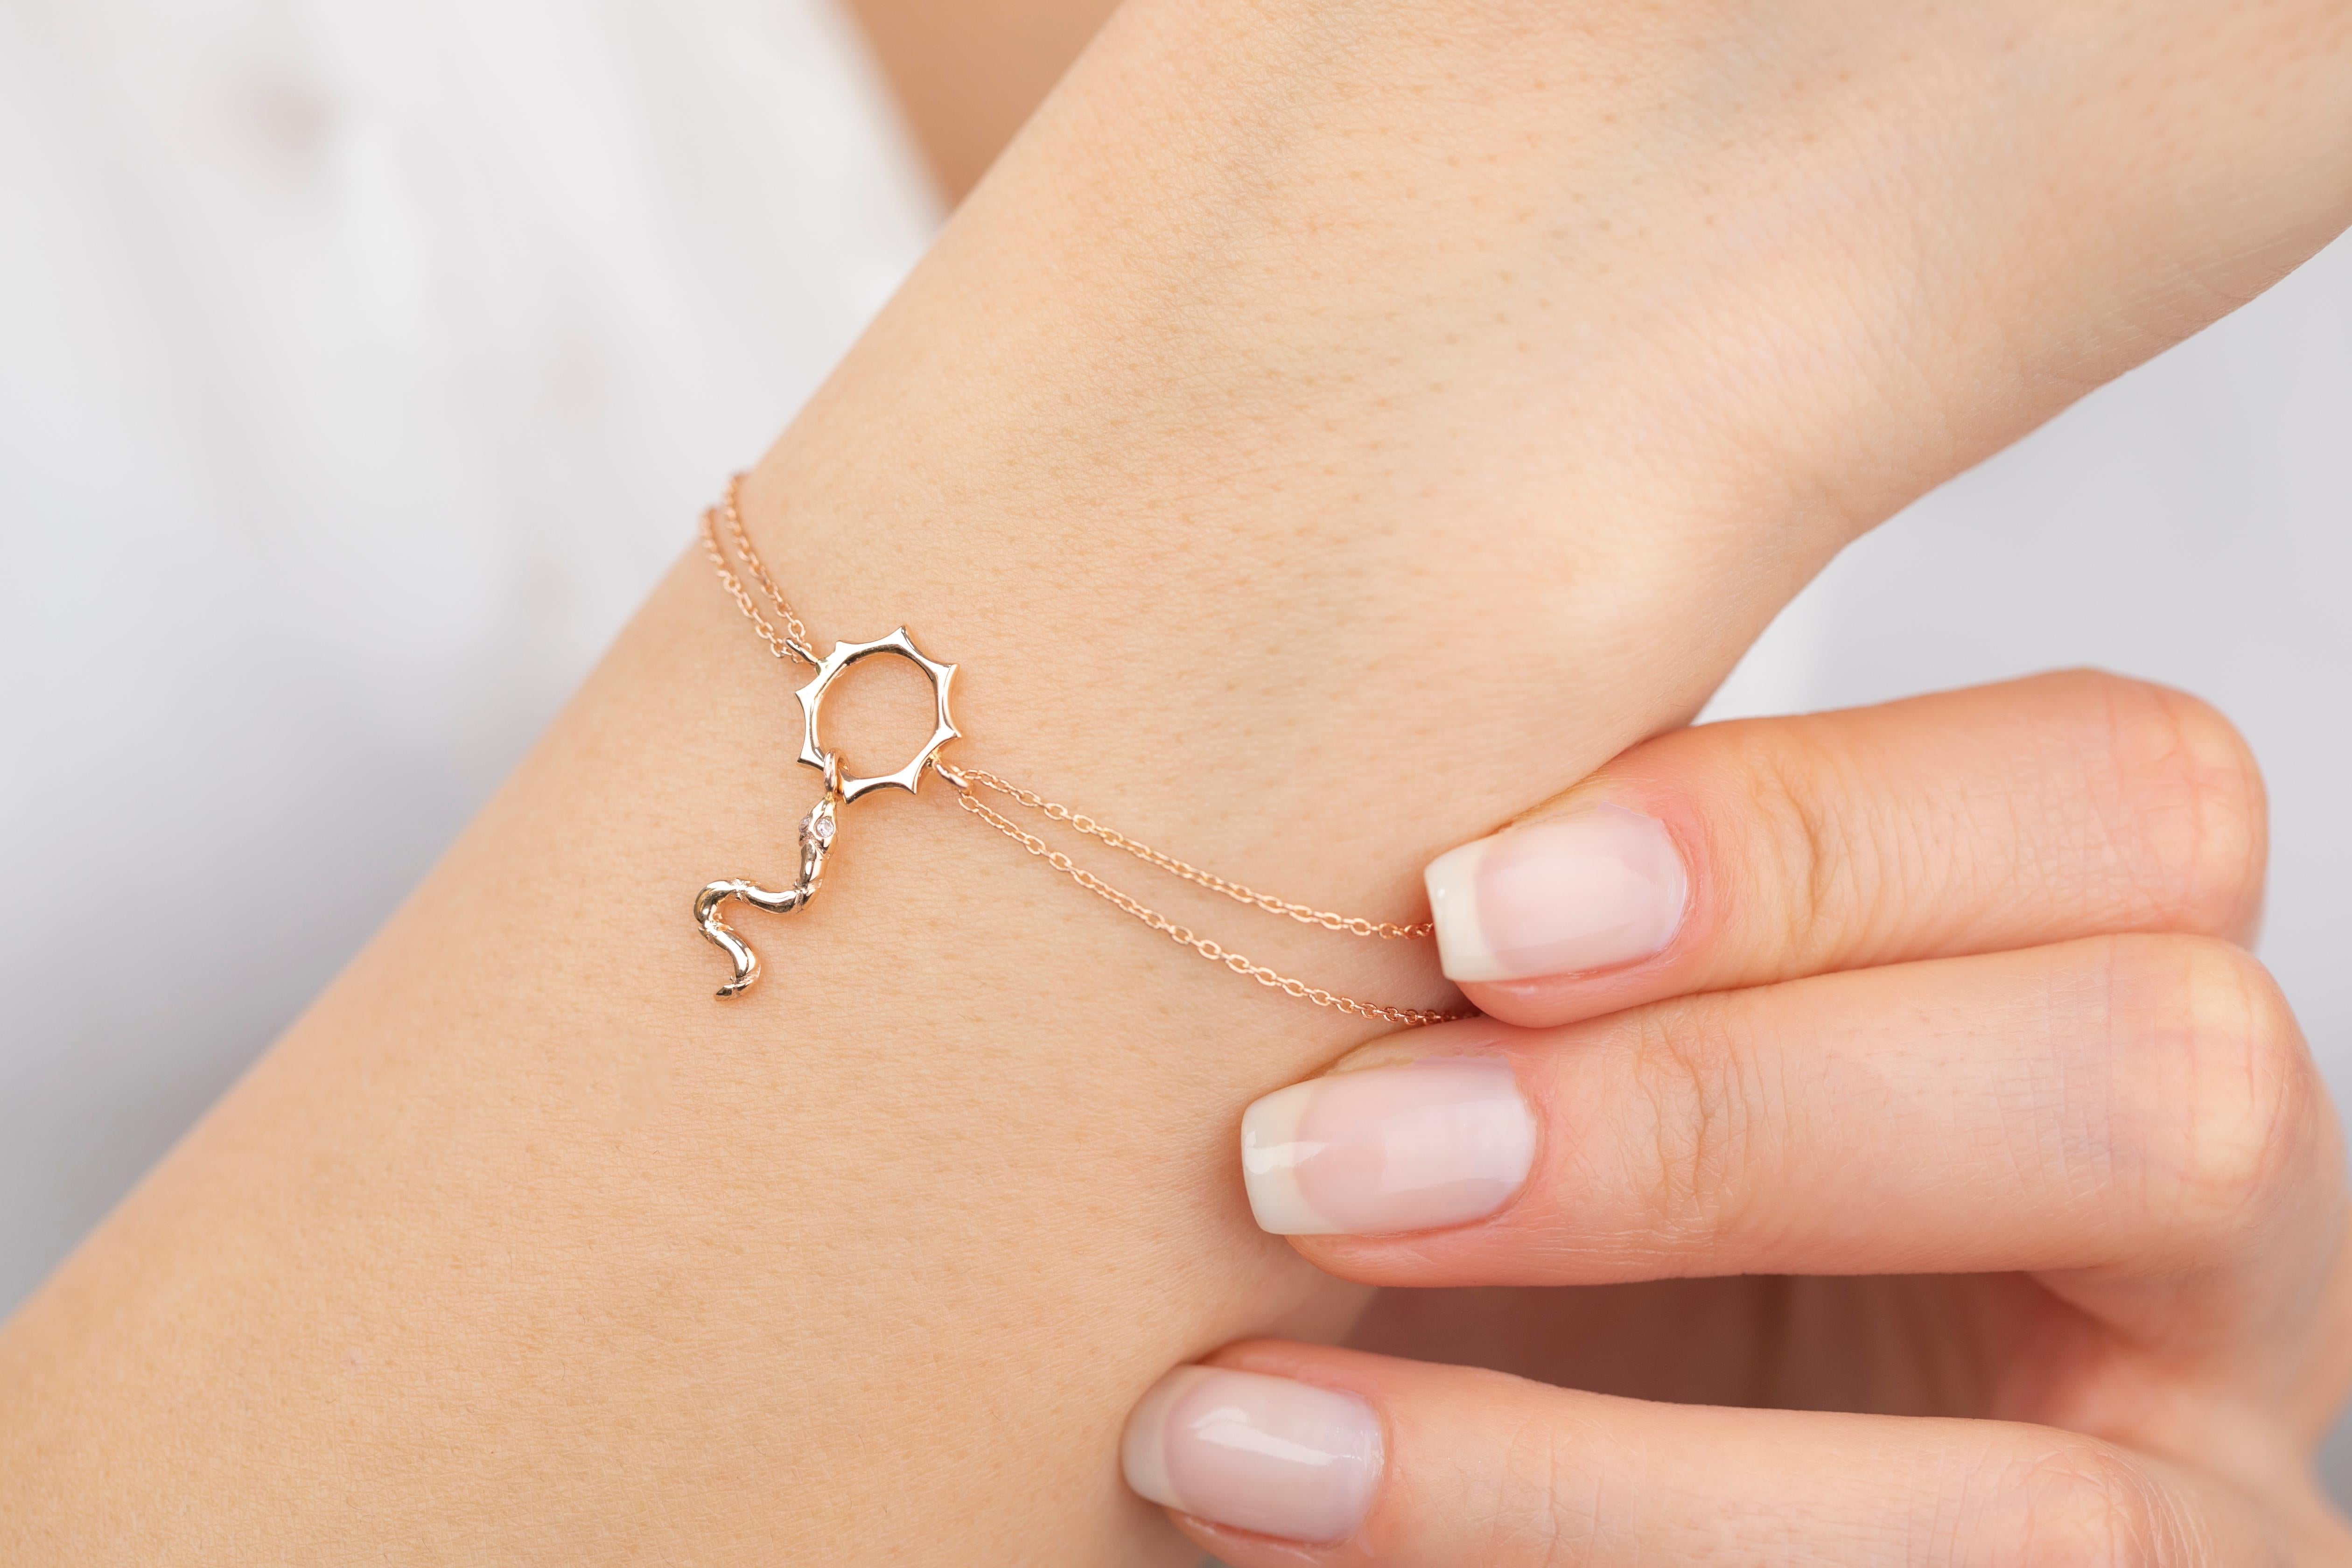 Contemporary 14K Gold Serpent Charm with Sun Dainty Chain Bracelet For Sale